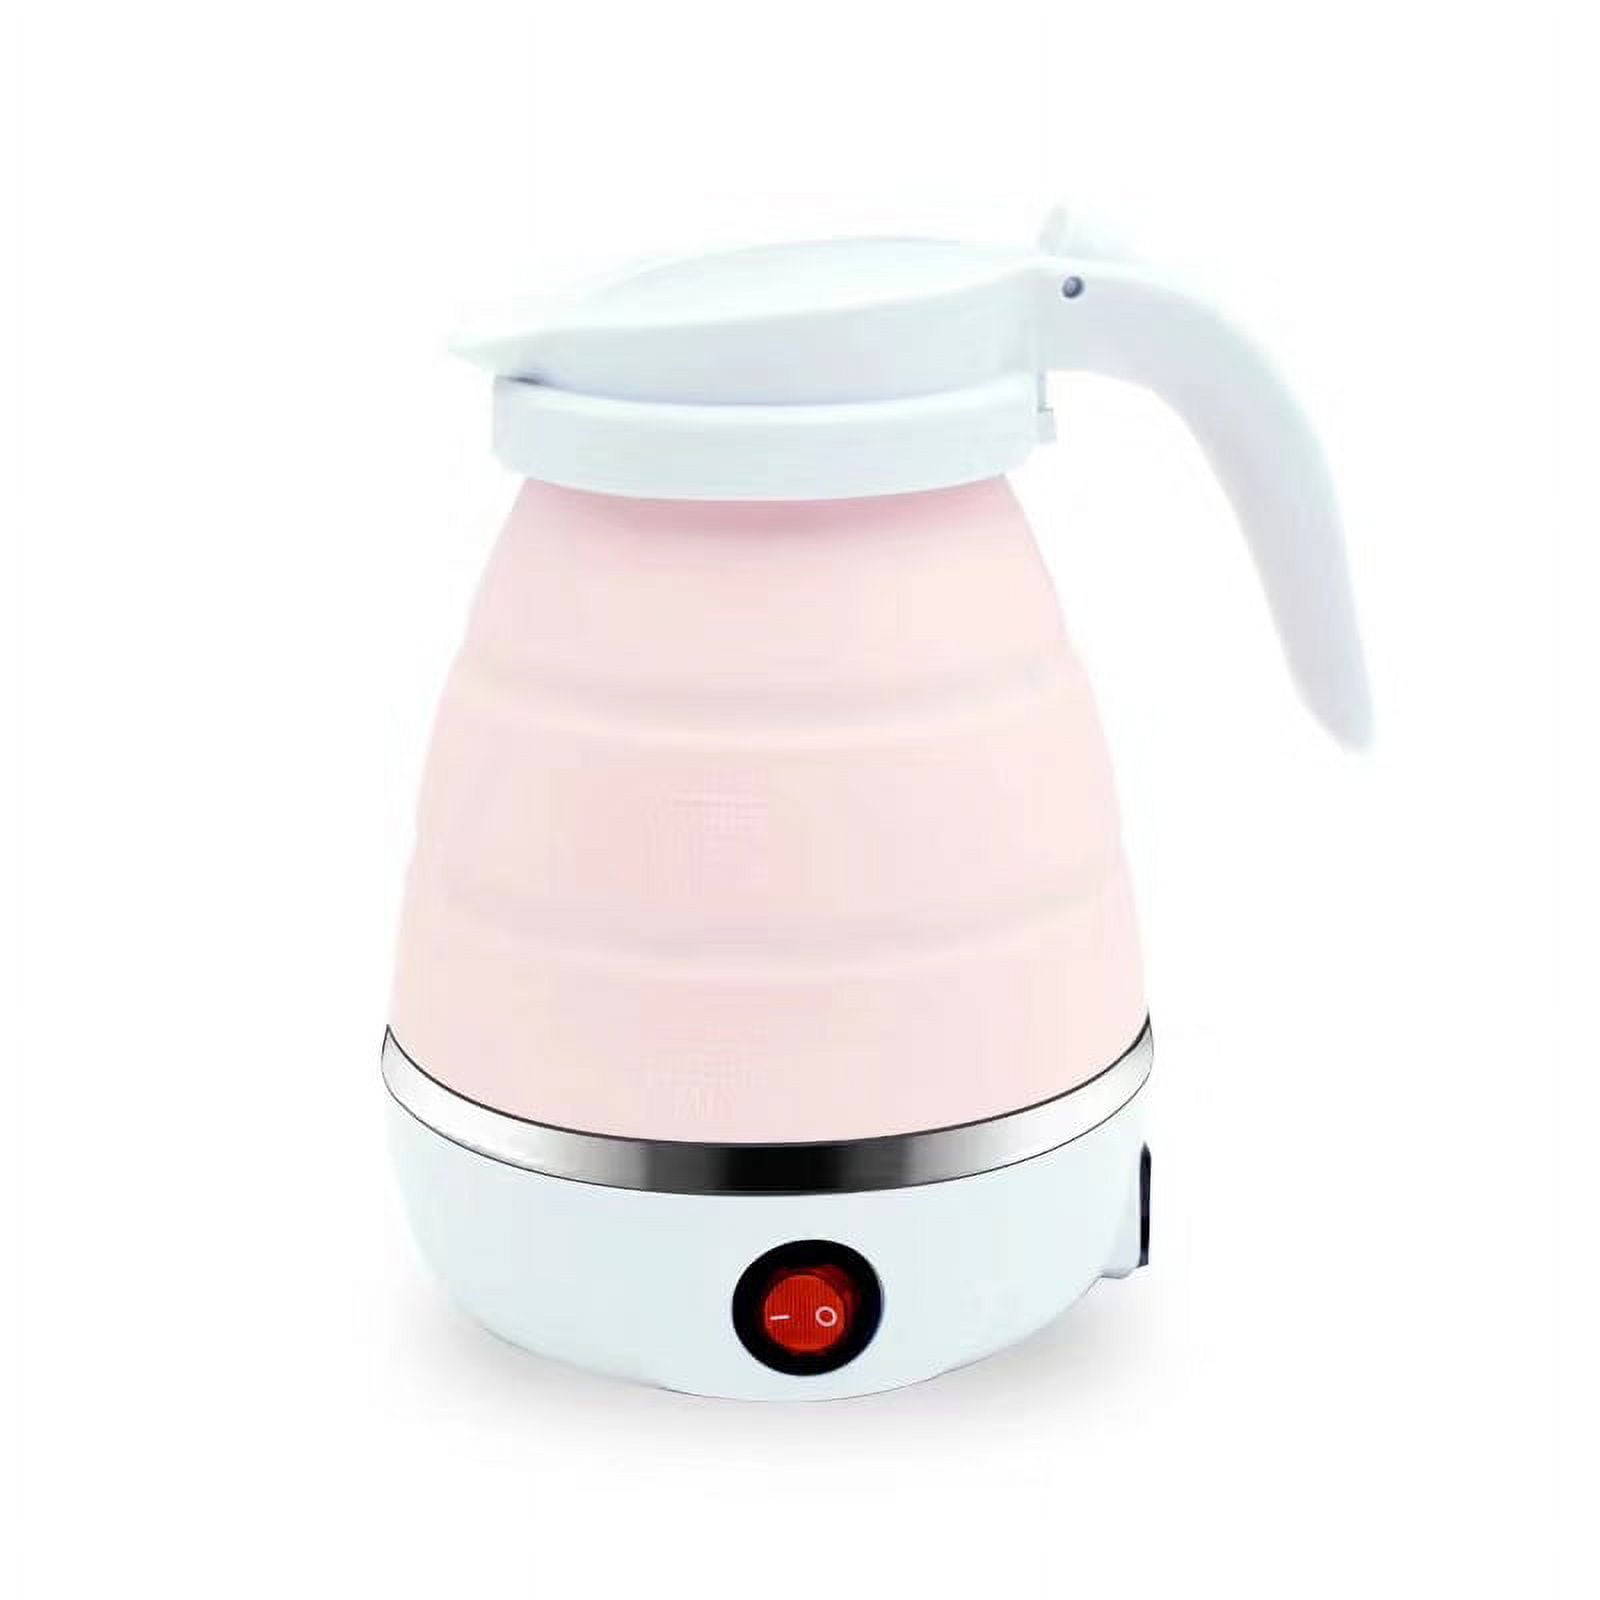 Portable Collapsible Travel Kettle Electric for Boiling Water, Tea